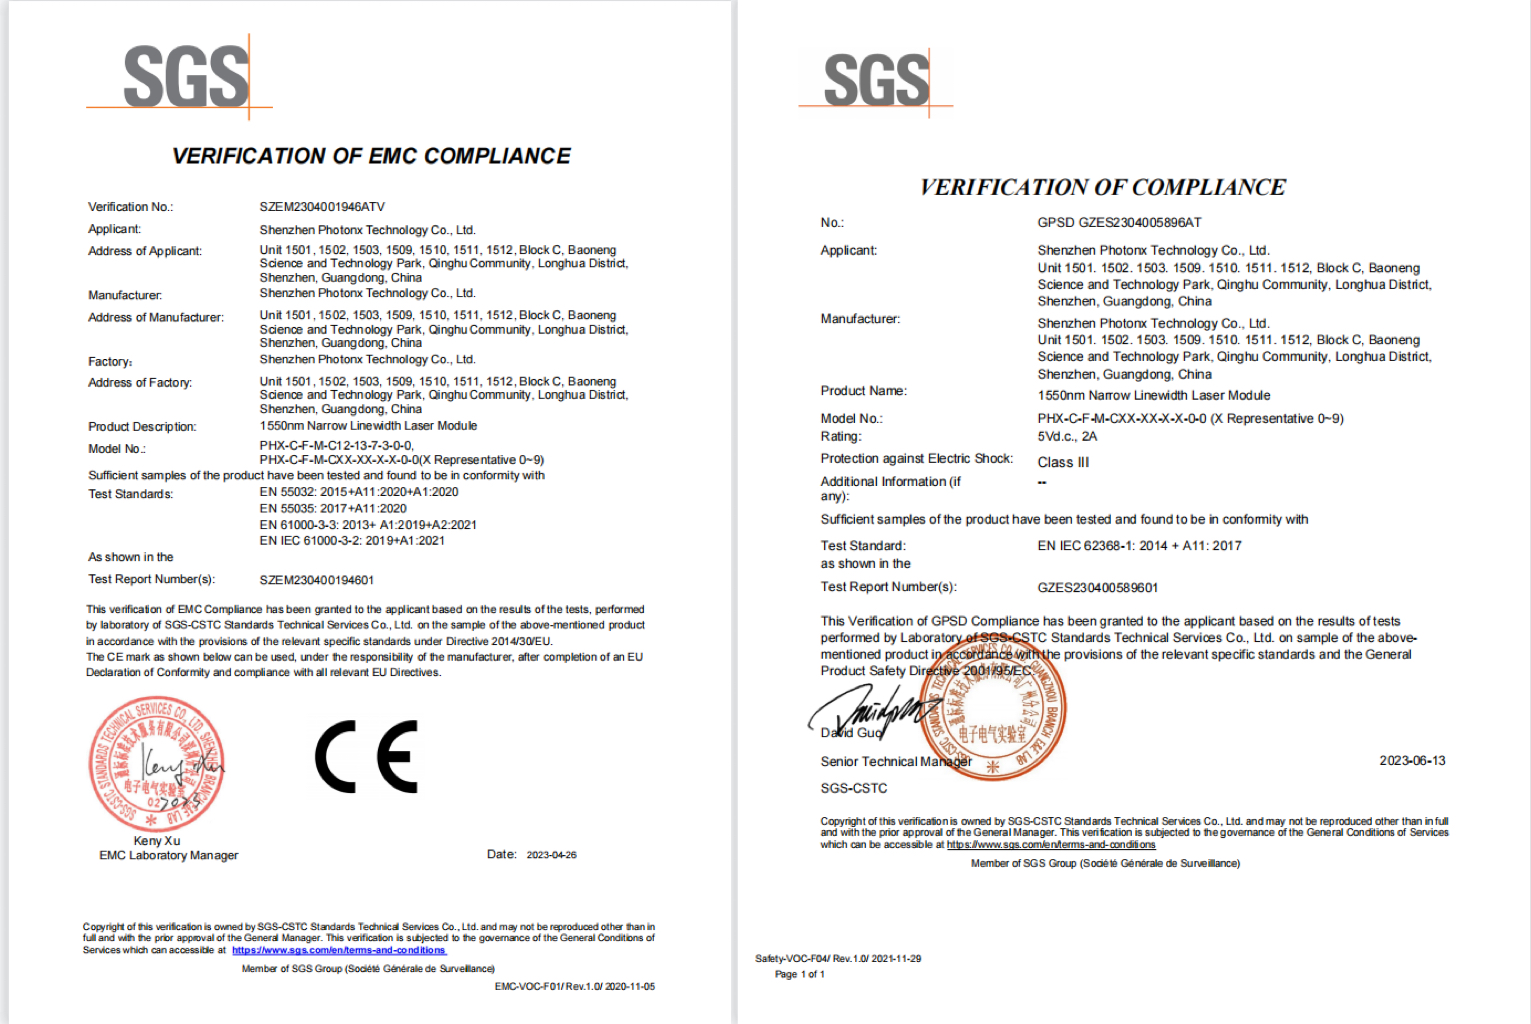 Micro source photons have won the "CE certification"